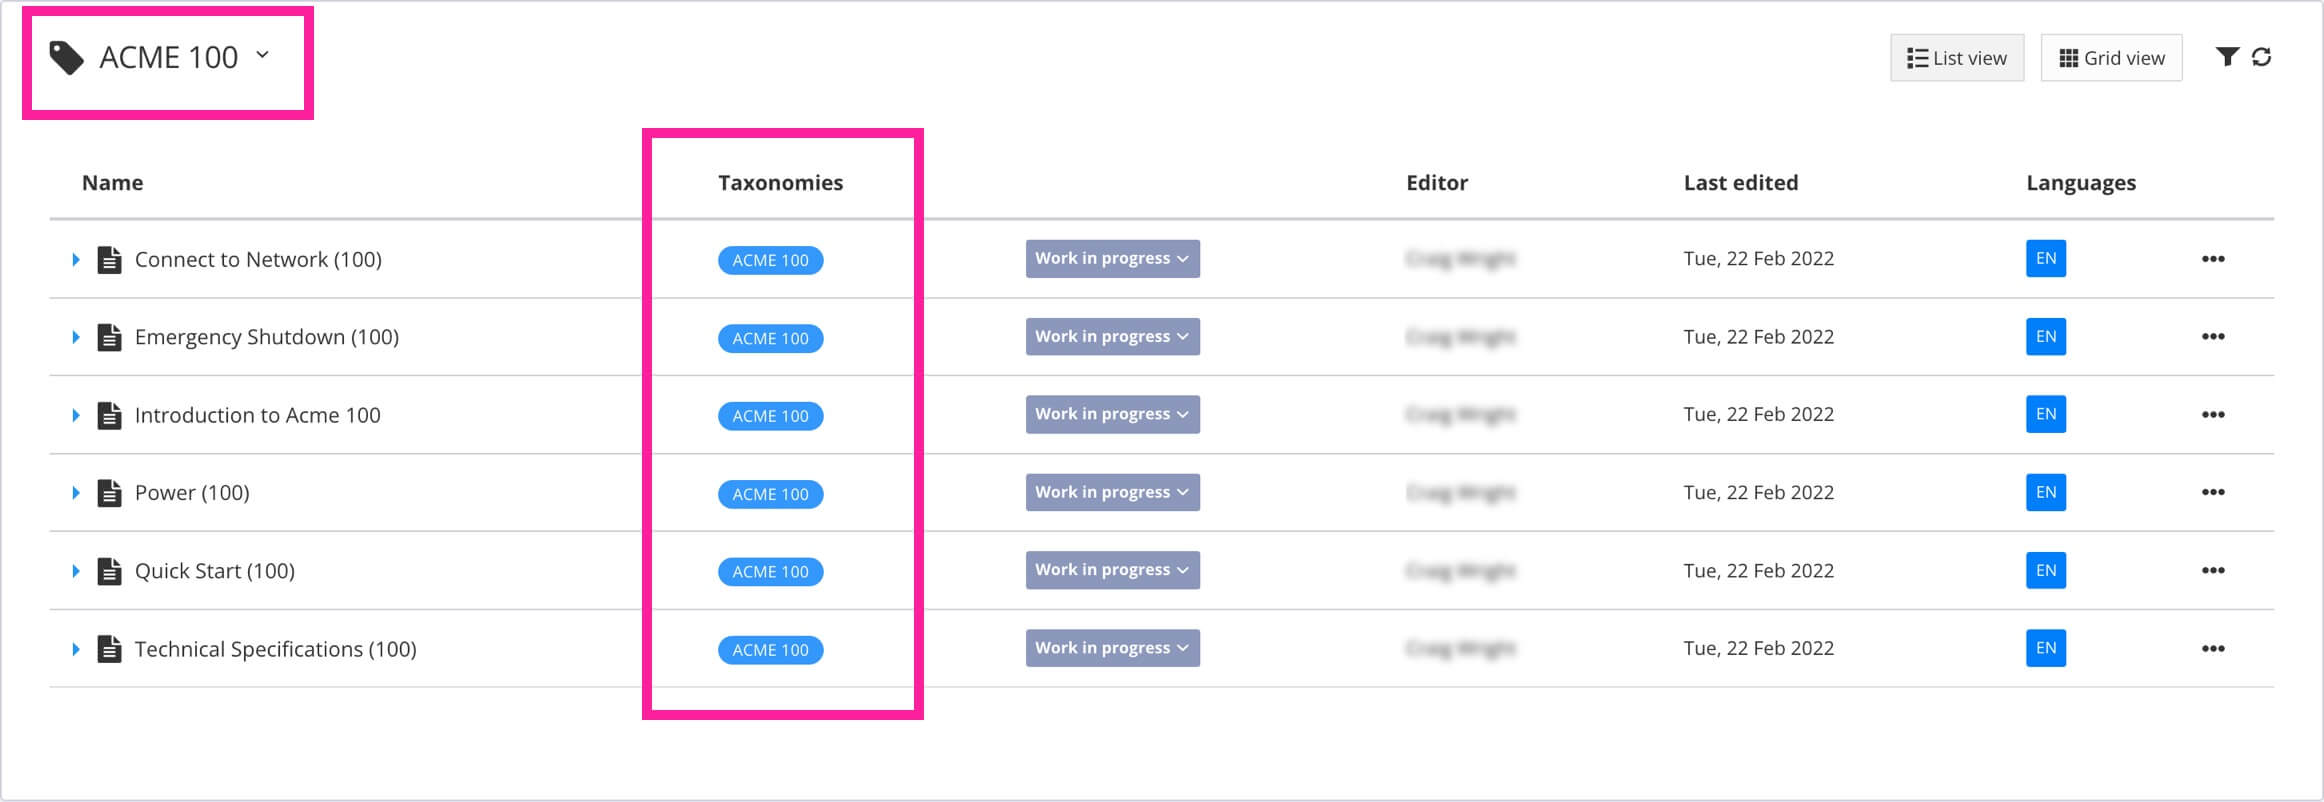 Taxonomies View shows the selected taxonomy tag and a list of all resources that are associated with that tag.